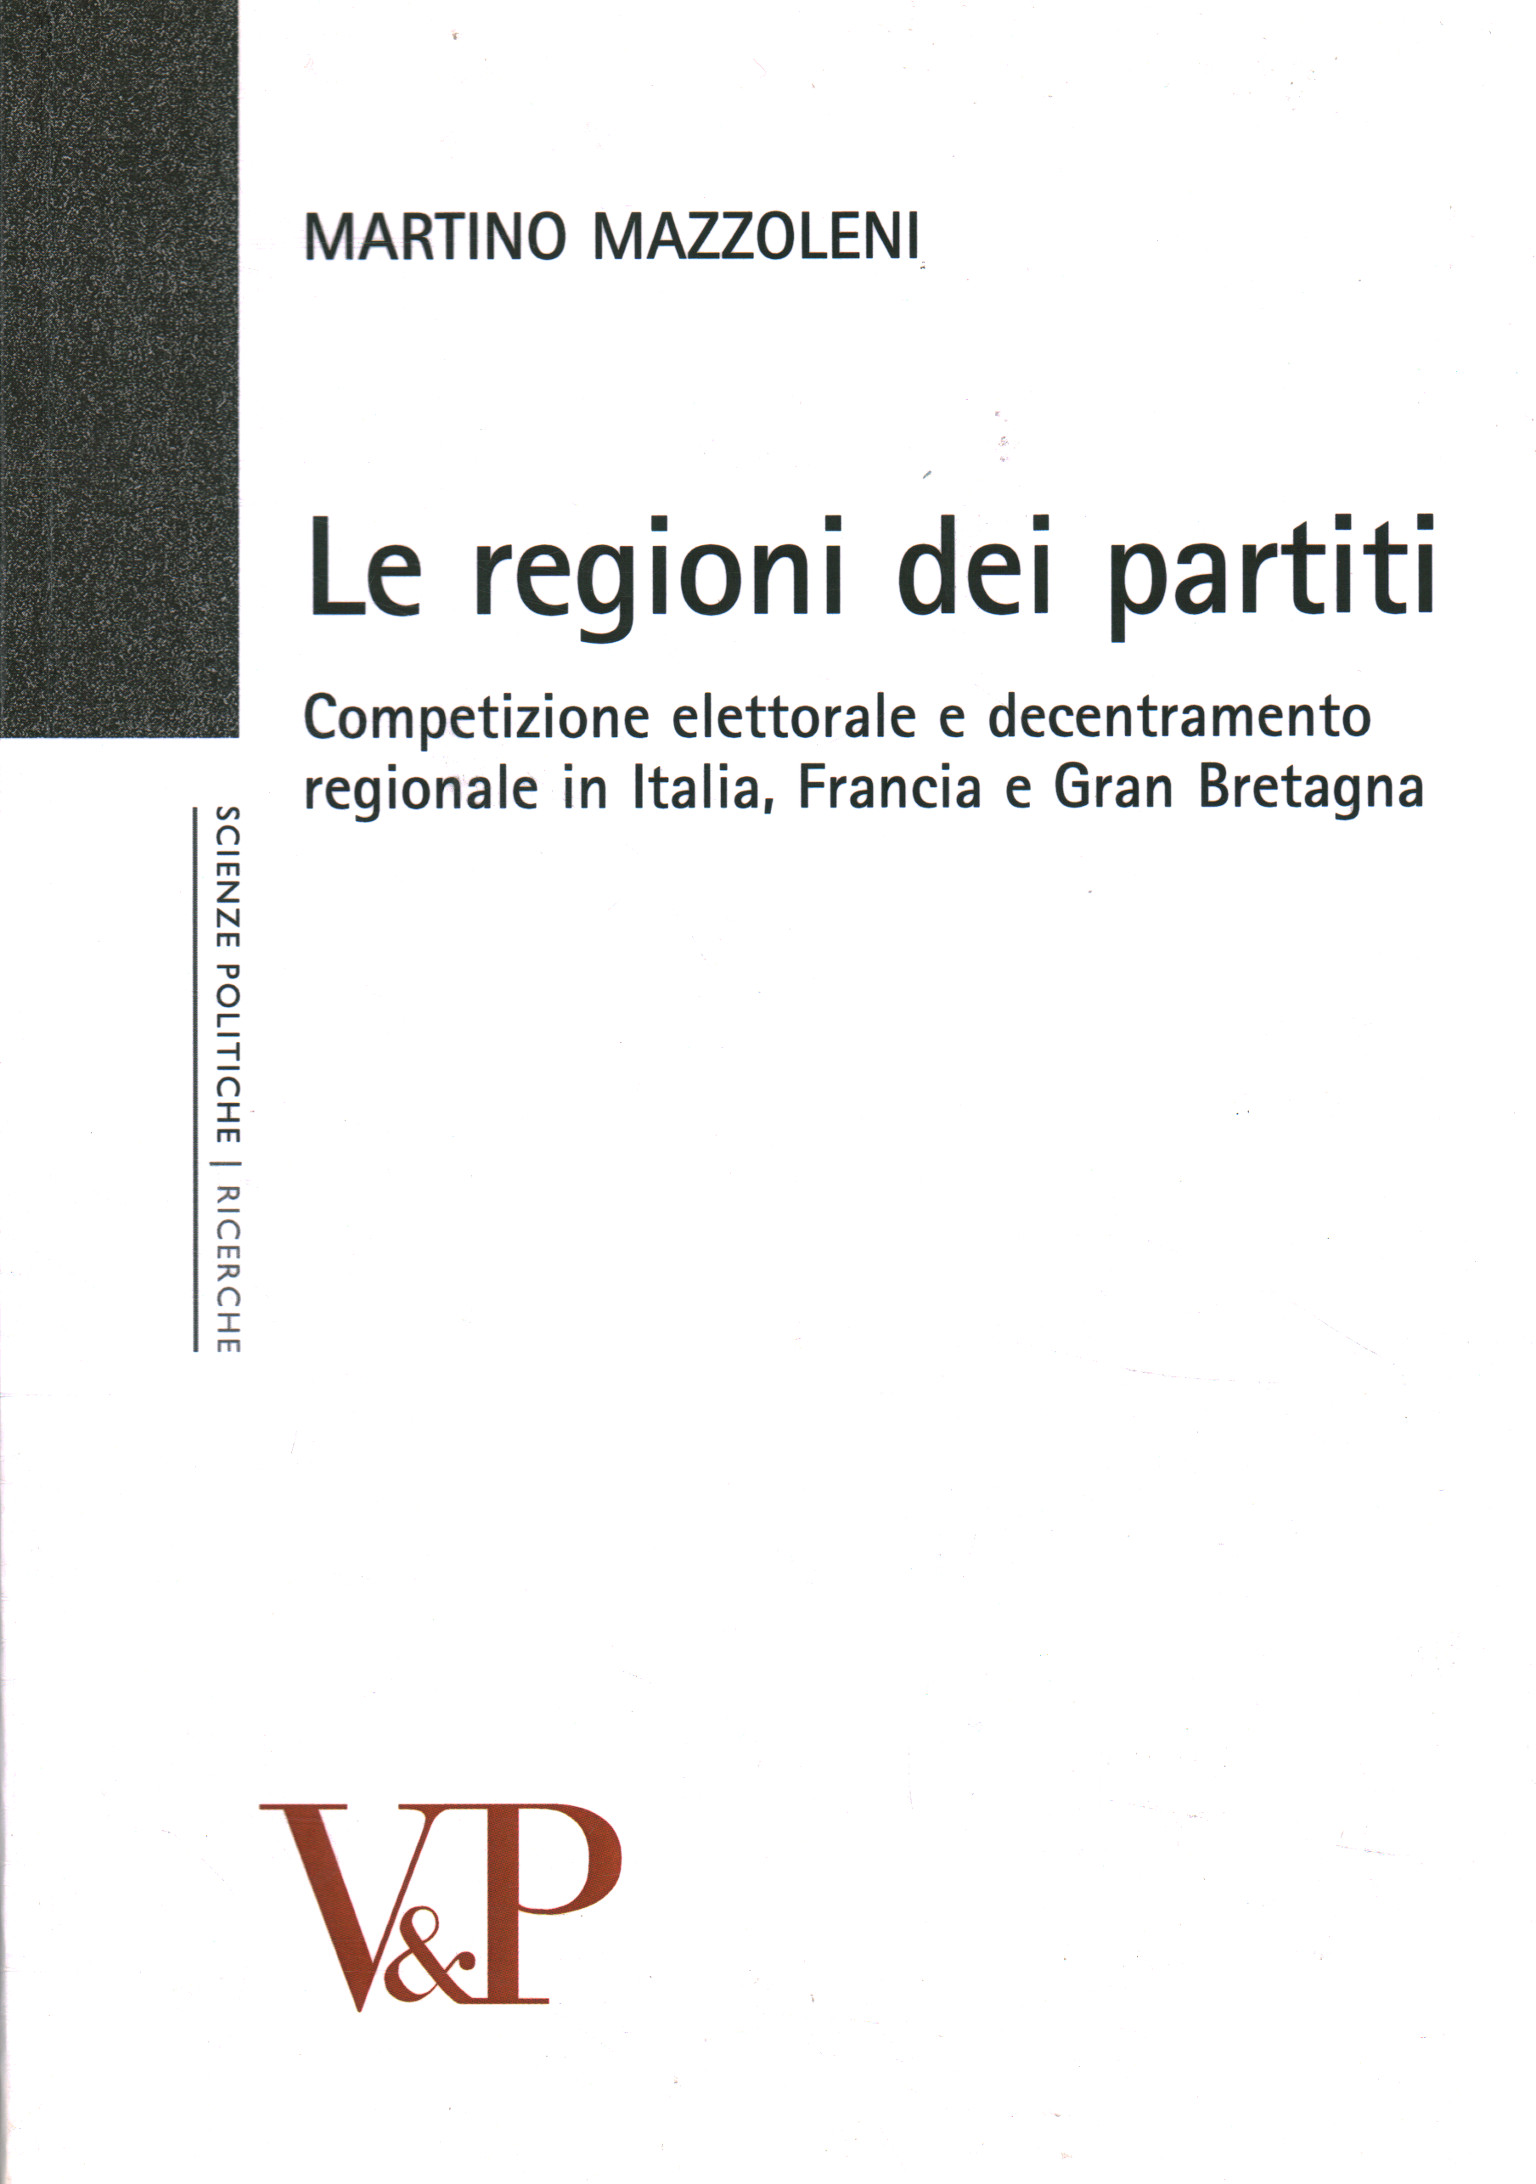 The regions of the parties, Martino Mazzoleni